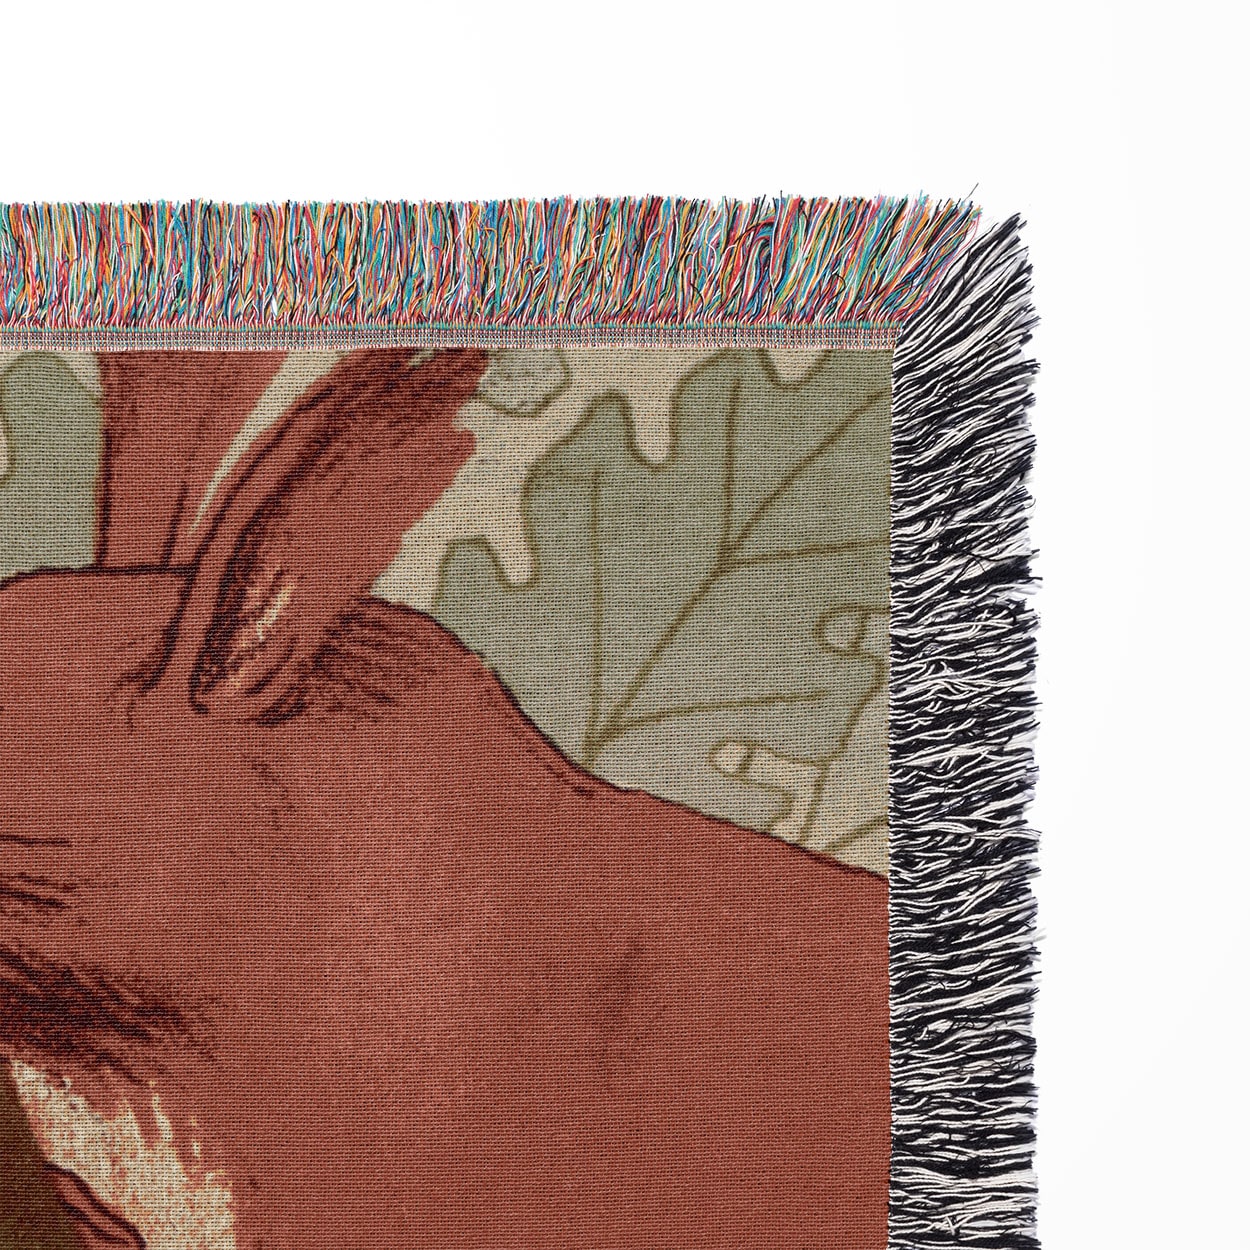 Red Squirrels Woven Blanket Woven Blanket Close Up